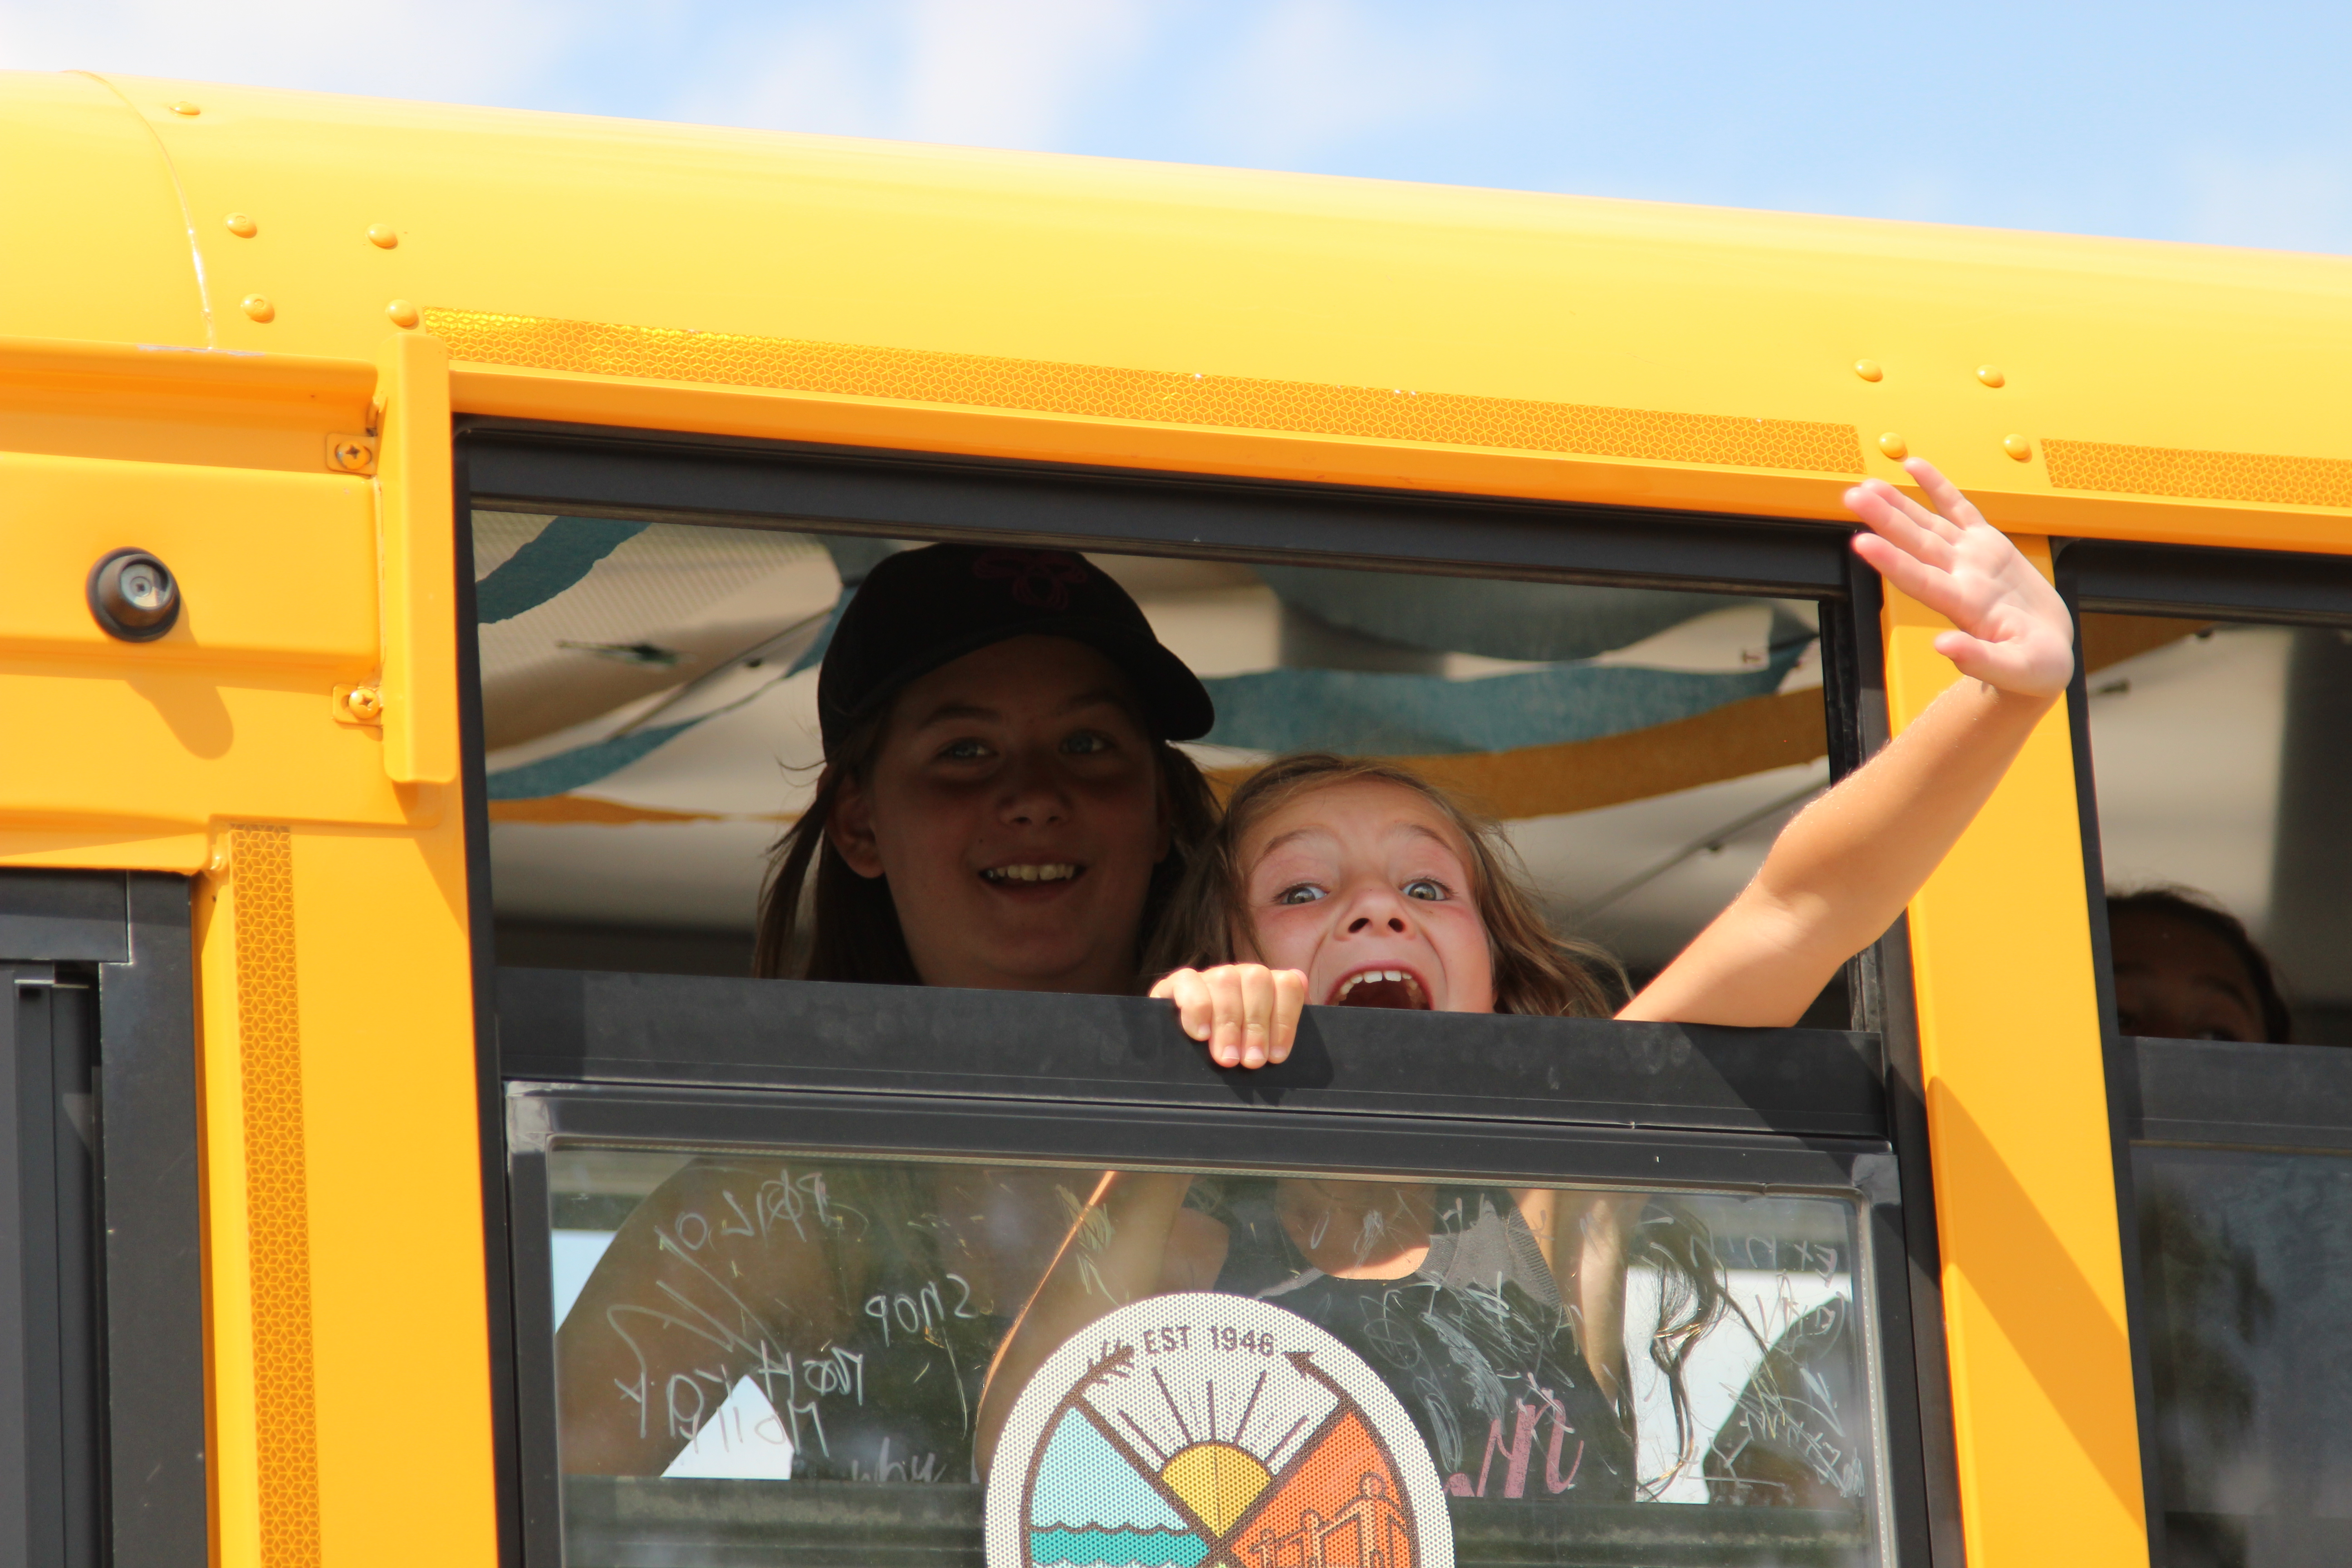 Waving goodbye from the Camp Robin Hood bus. Camp Robin Hood is Canada's oldest and largest day camp.